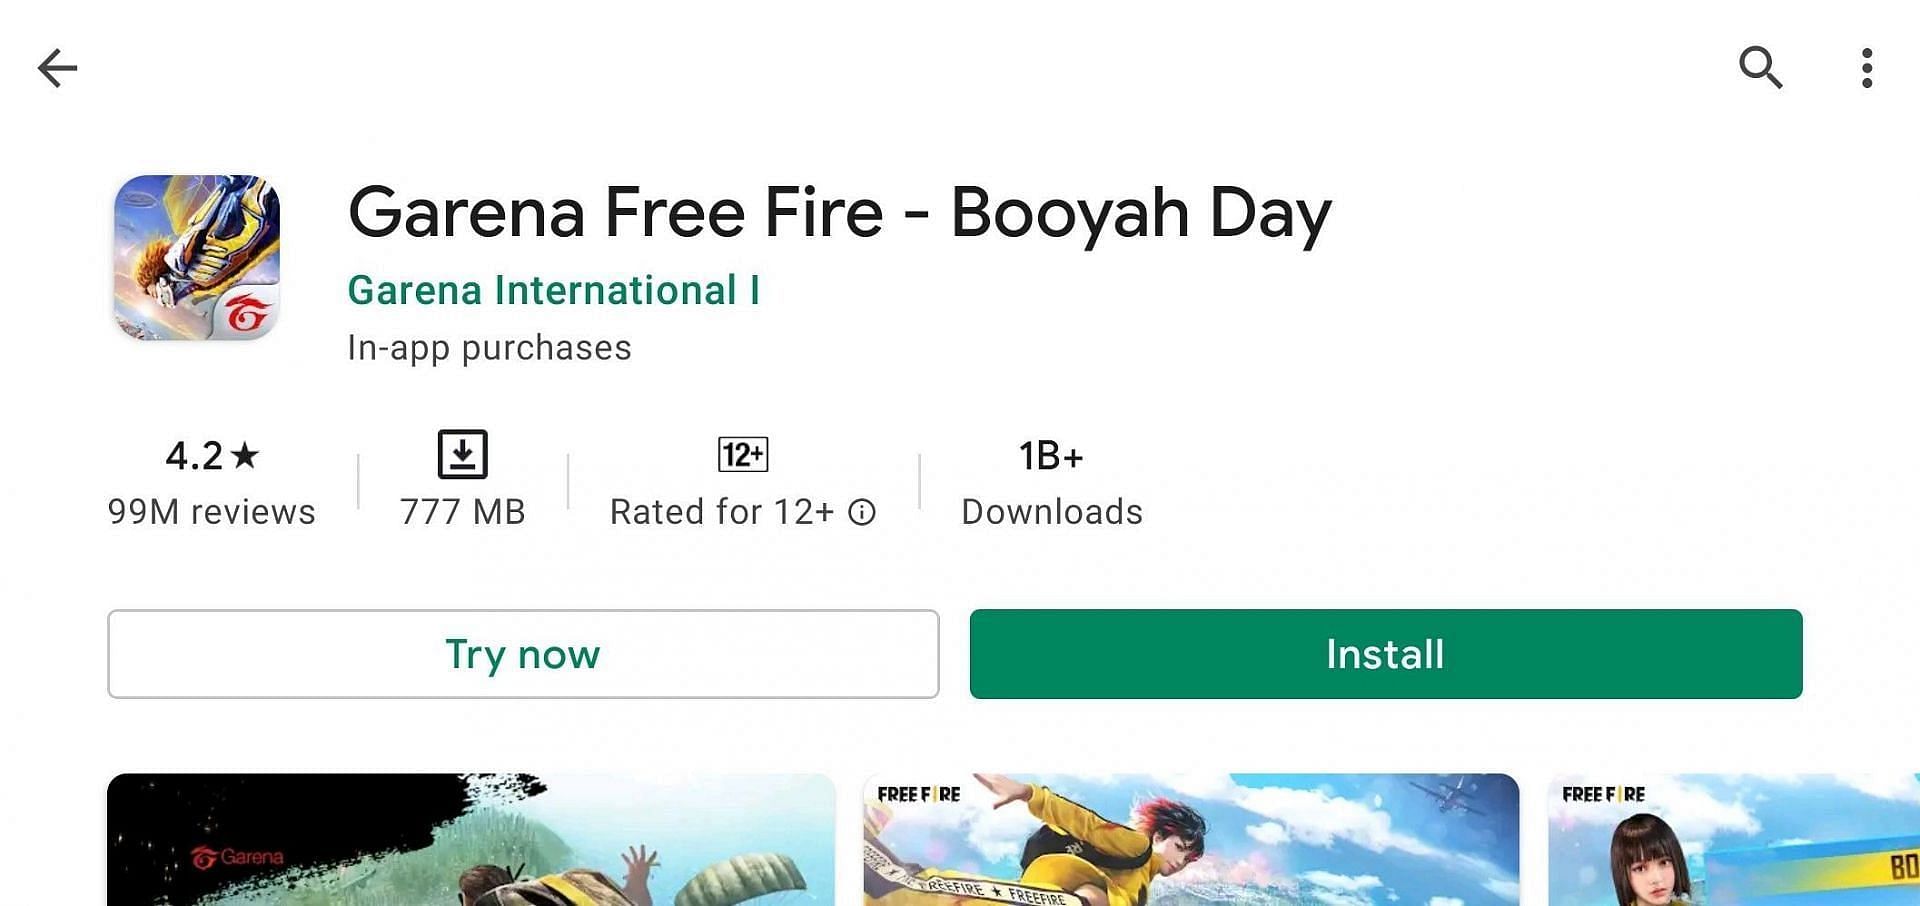 How to play Free Fire demo on Android without downloading